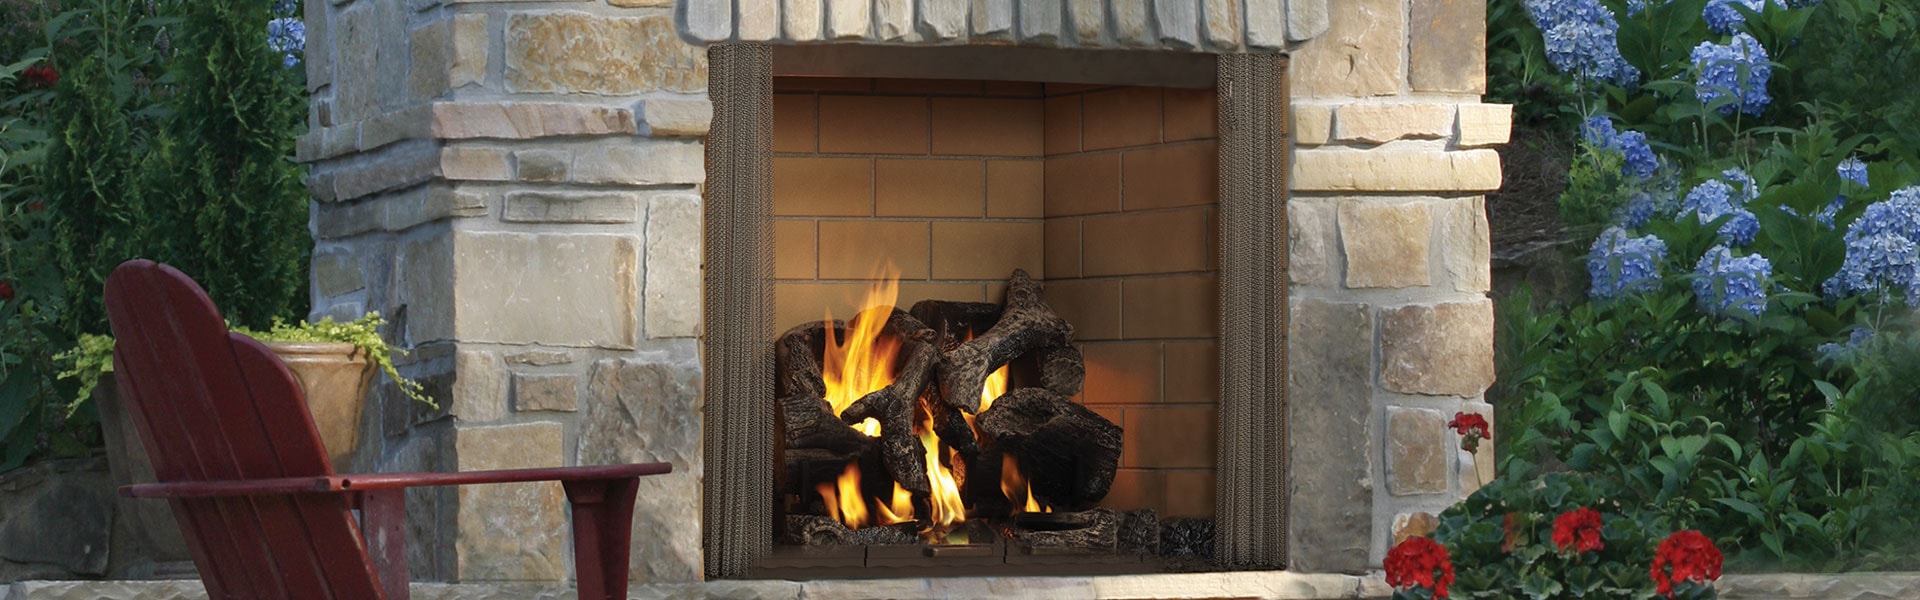 How to Remove Fireplace Glass Doors Beautiful Castlewood Wood Fireplace